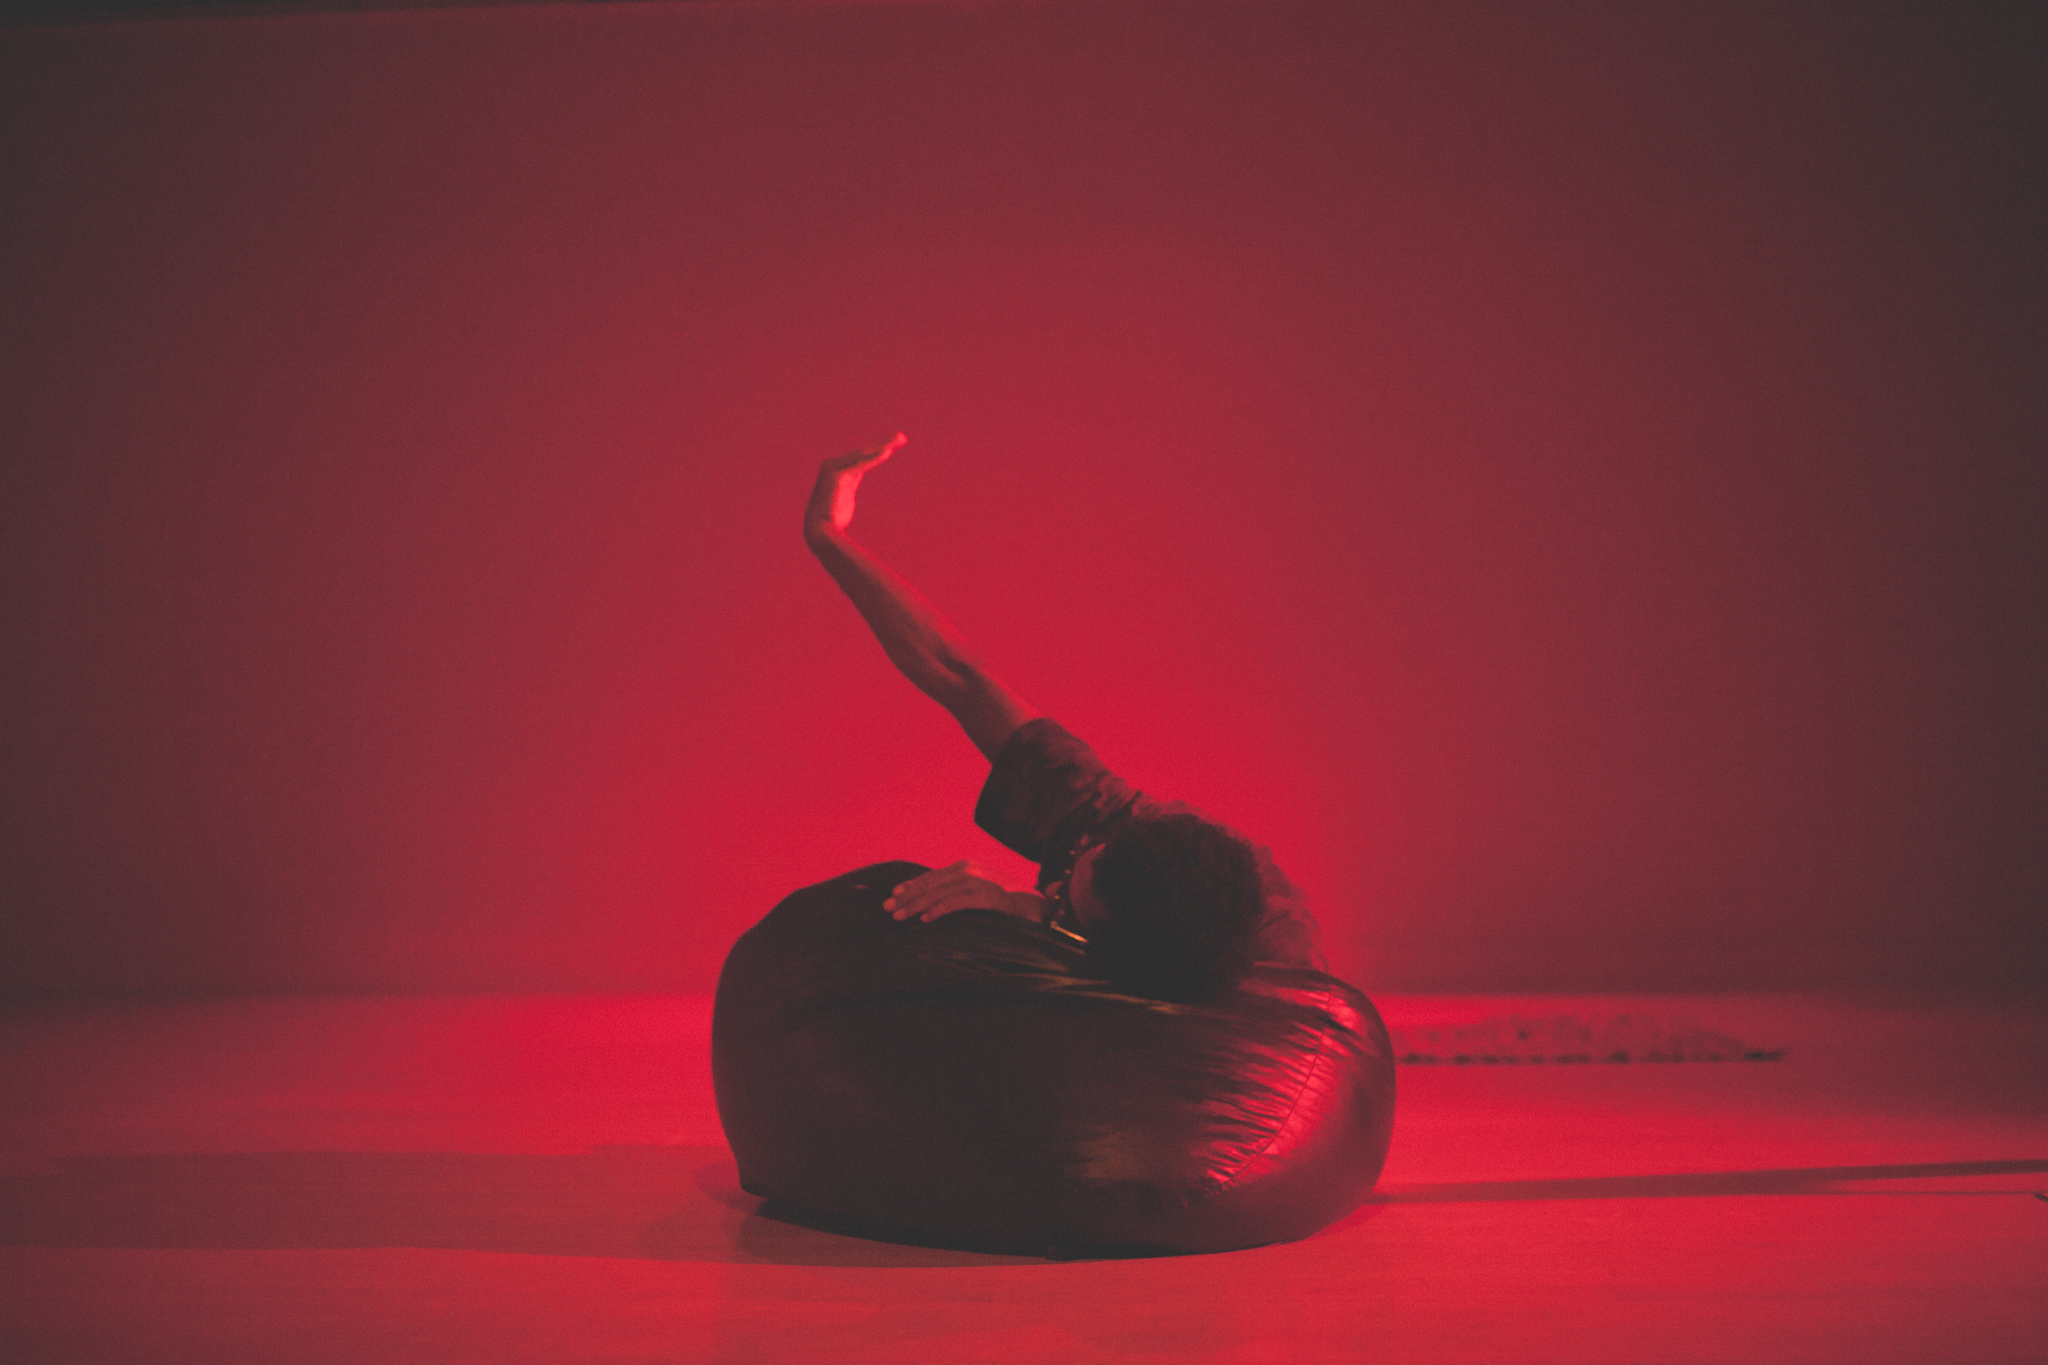 Swathed in red light, Joelle Mercedes performs at Links Hall. Mercedes leans on a cushion with one arm in the air. Photo by Ally Almore